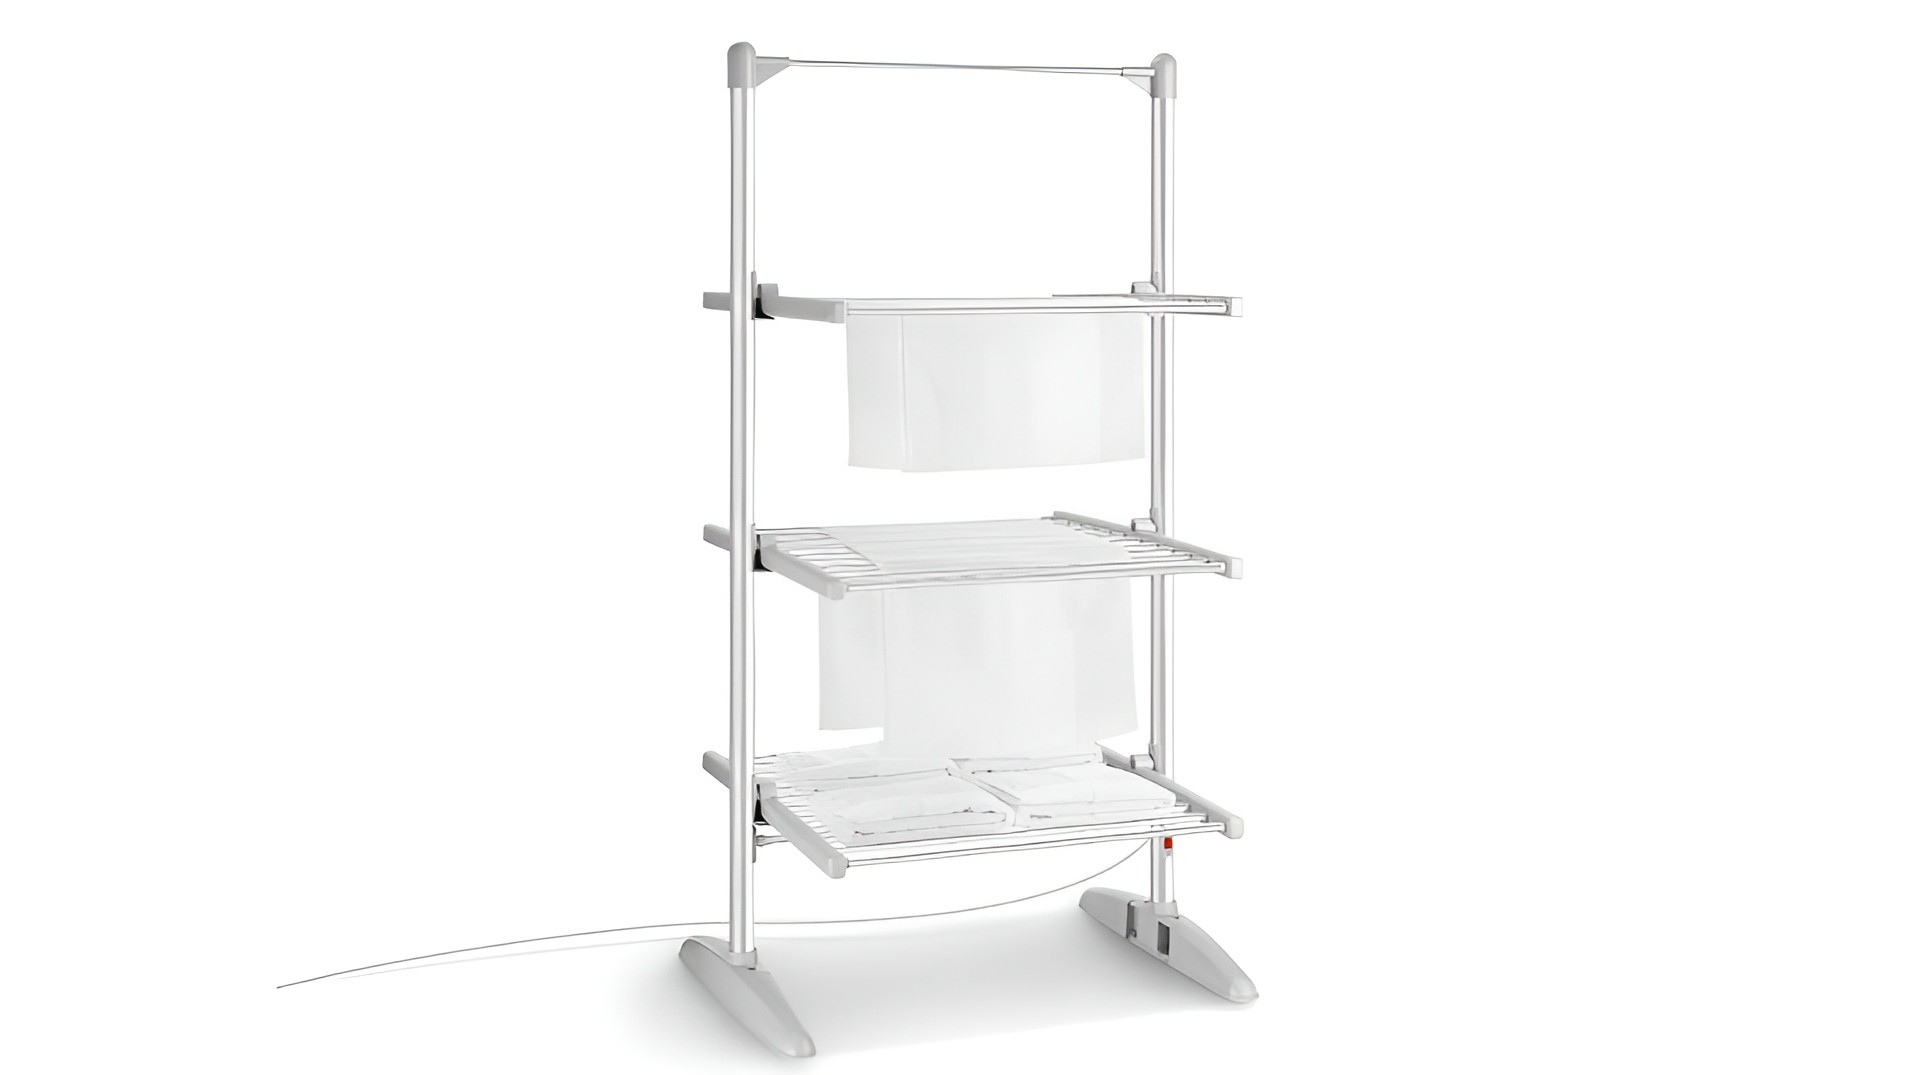 Heated Clothes Airer 3. Heated Towel Rails